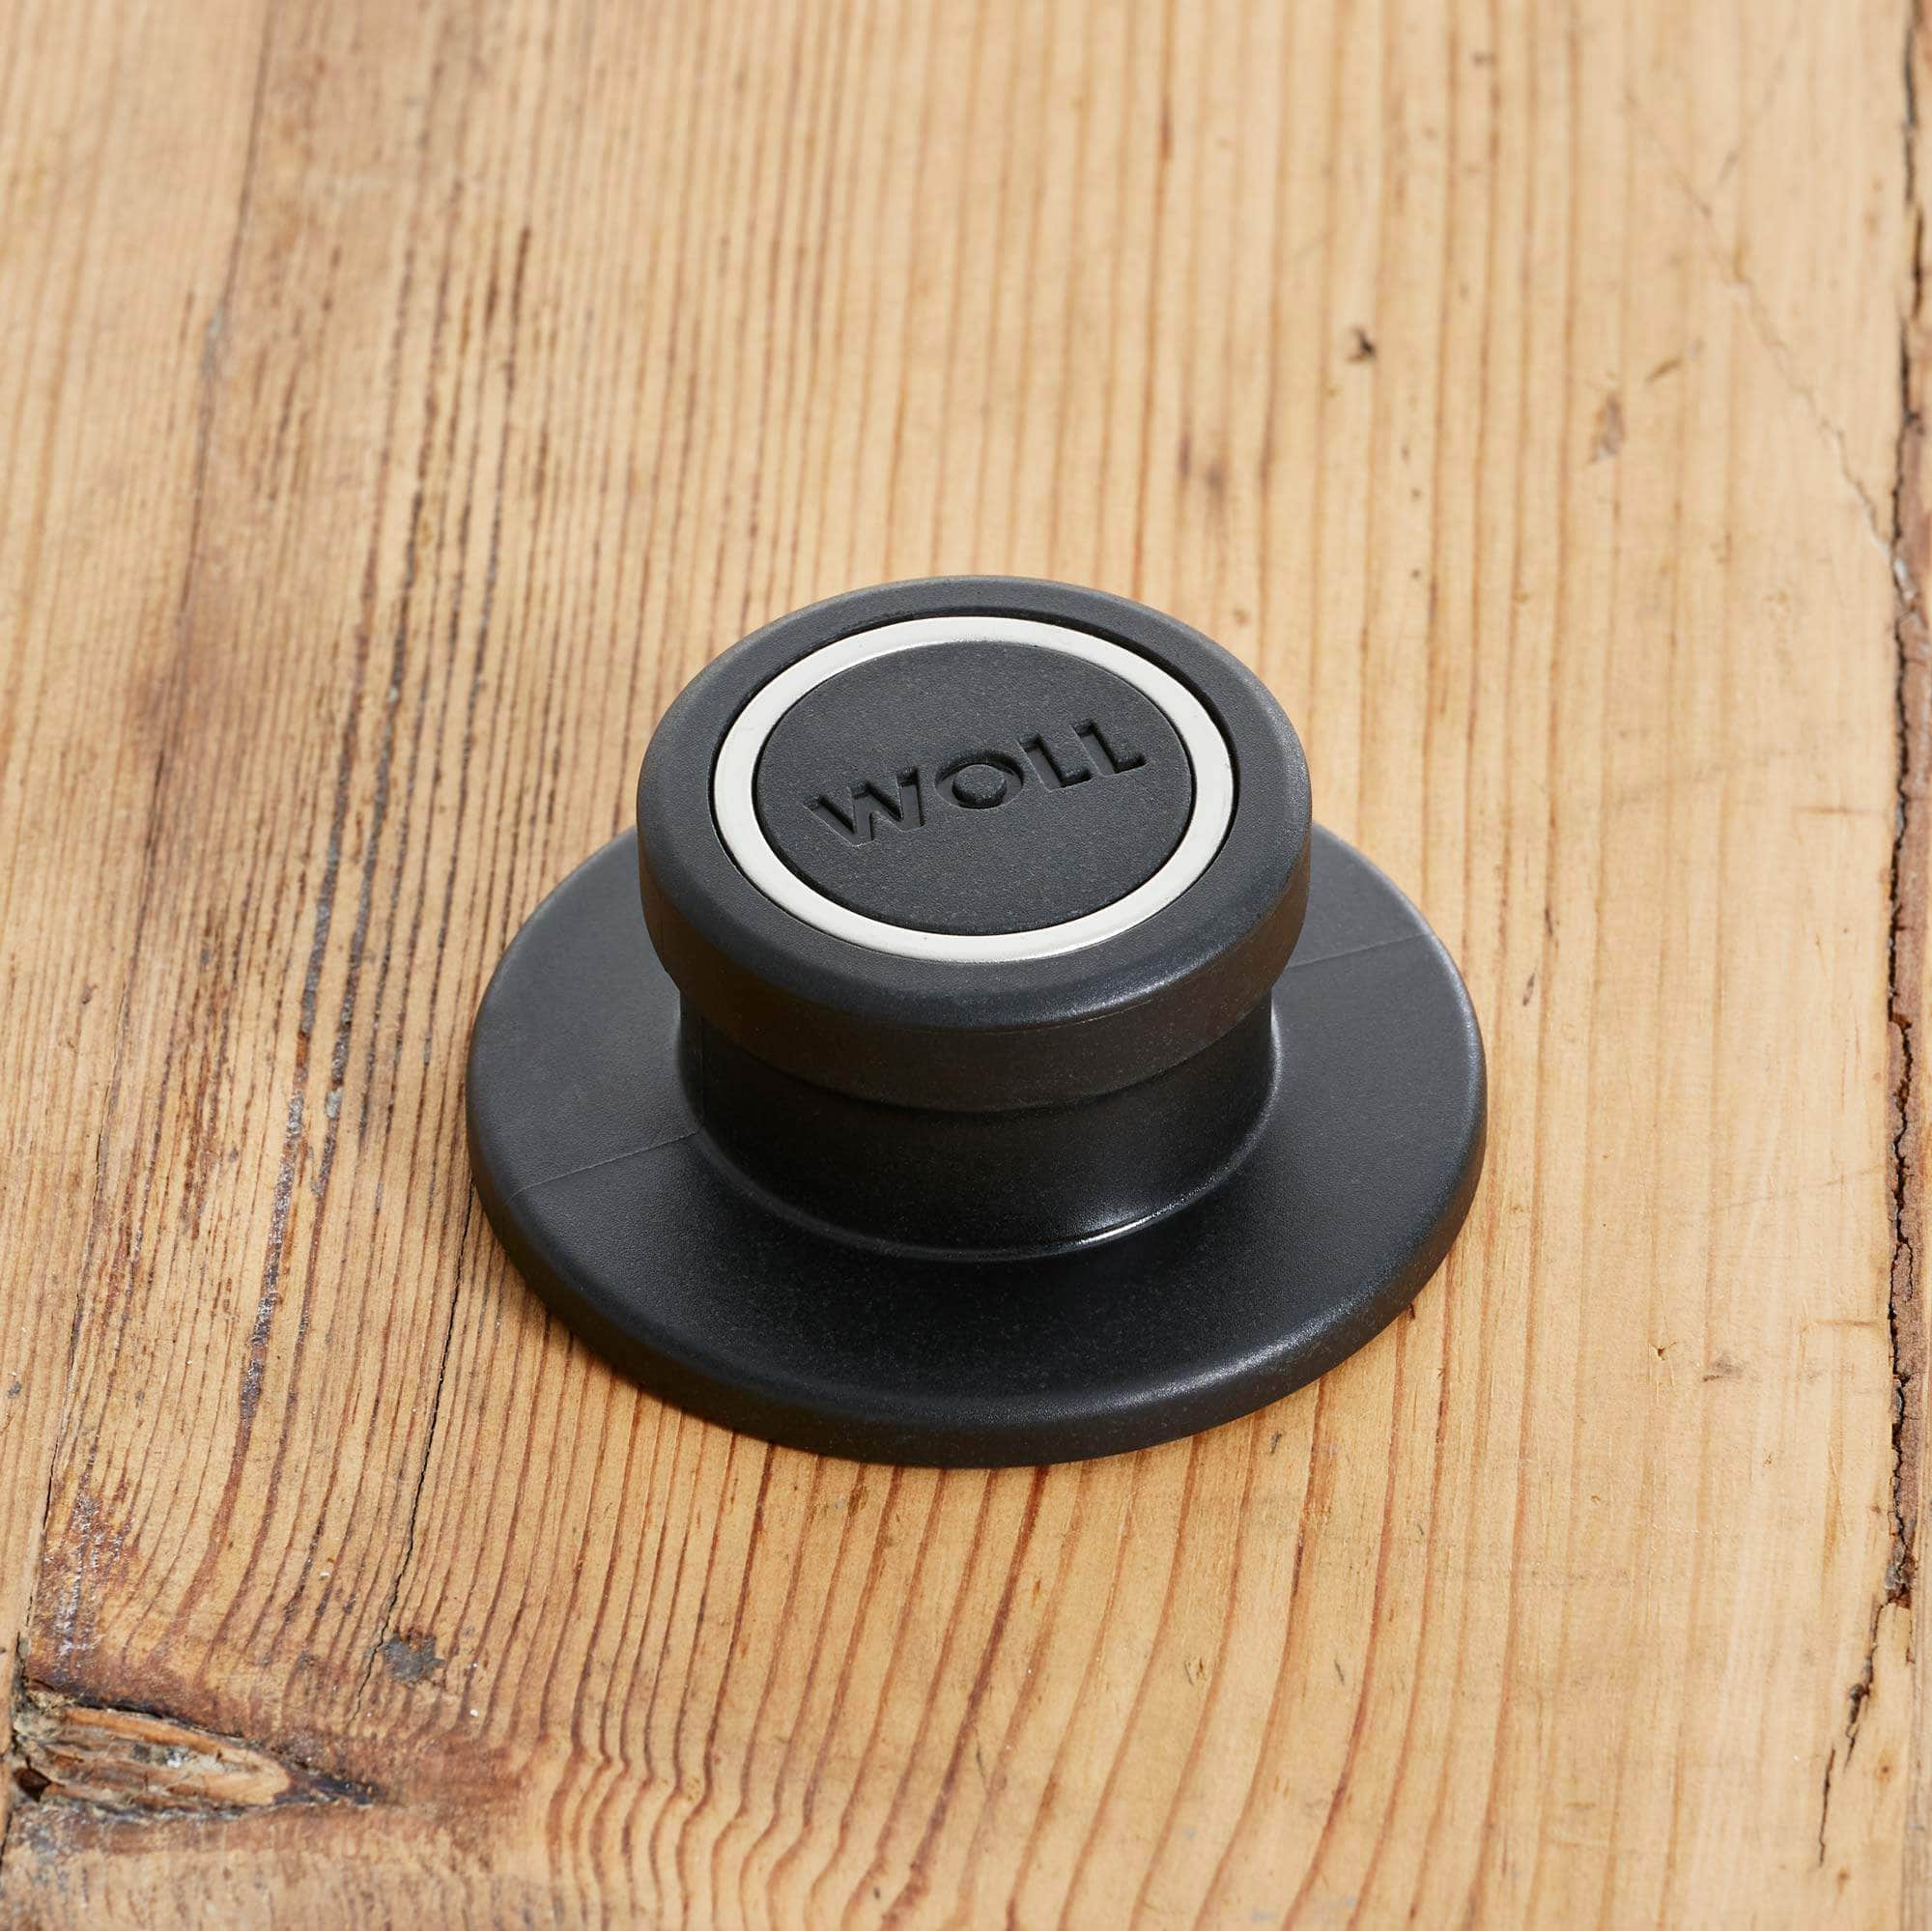 Replacement Lid Knob for Woll™ Diamond Lite pans